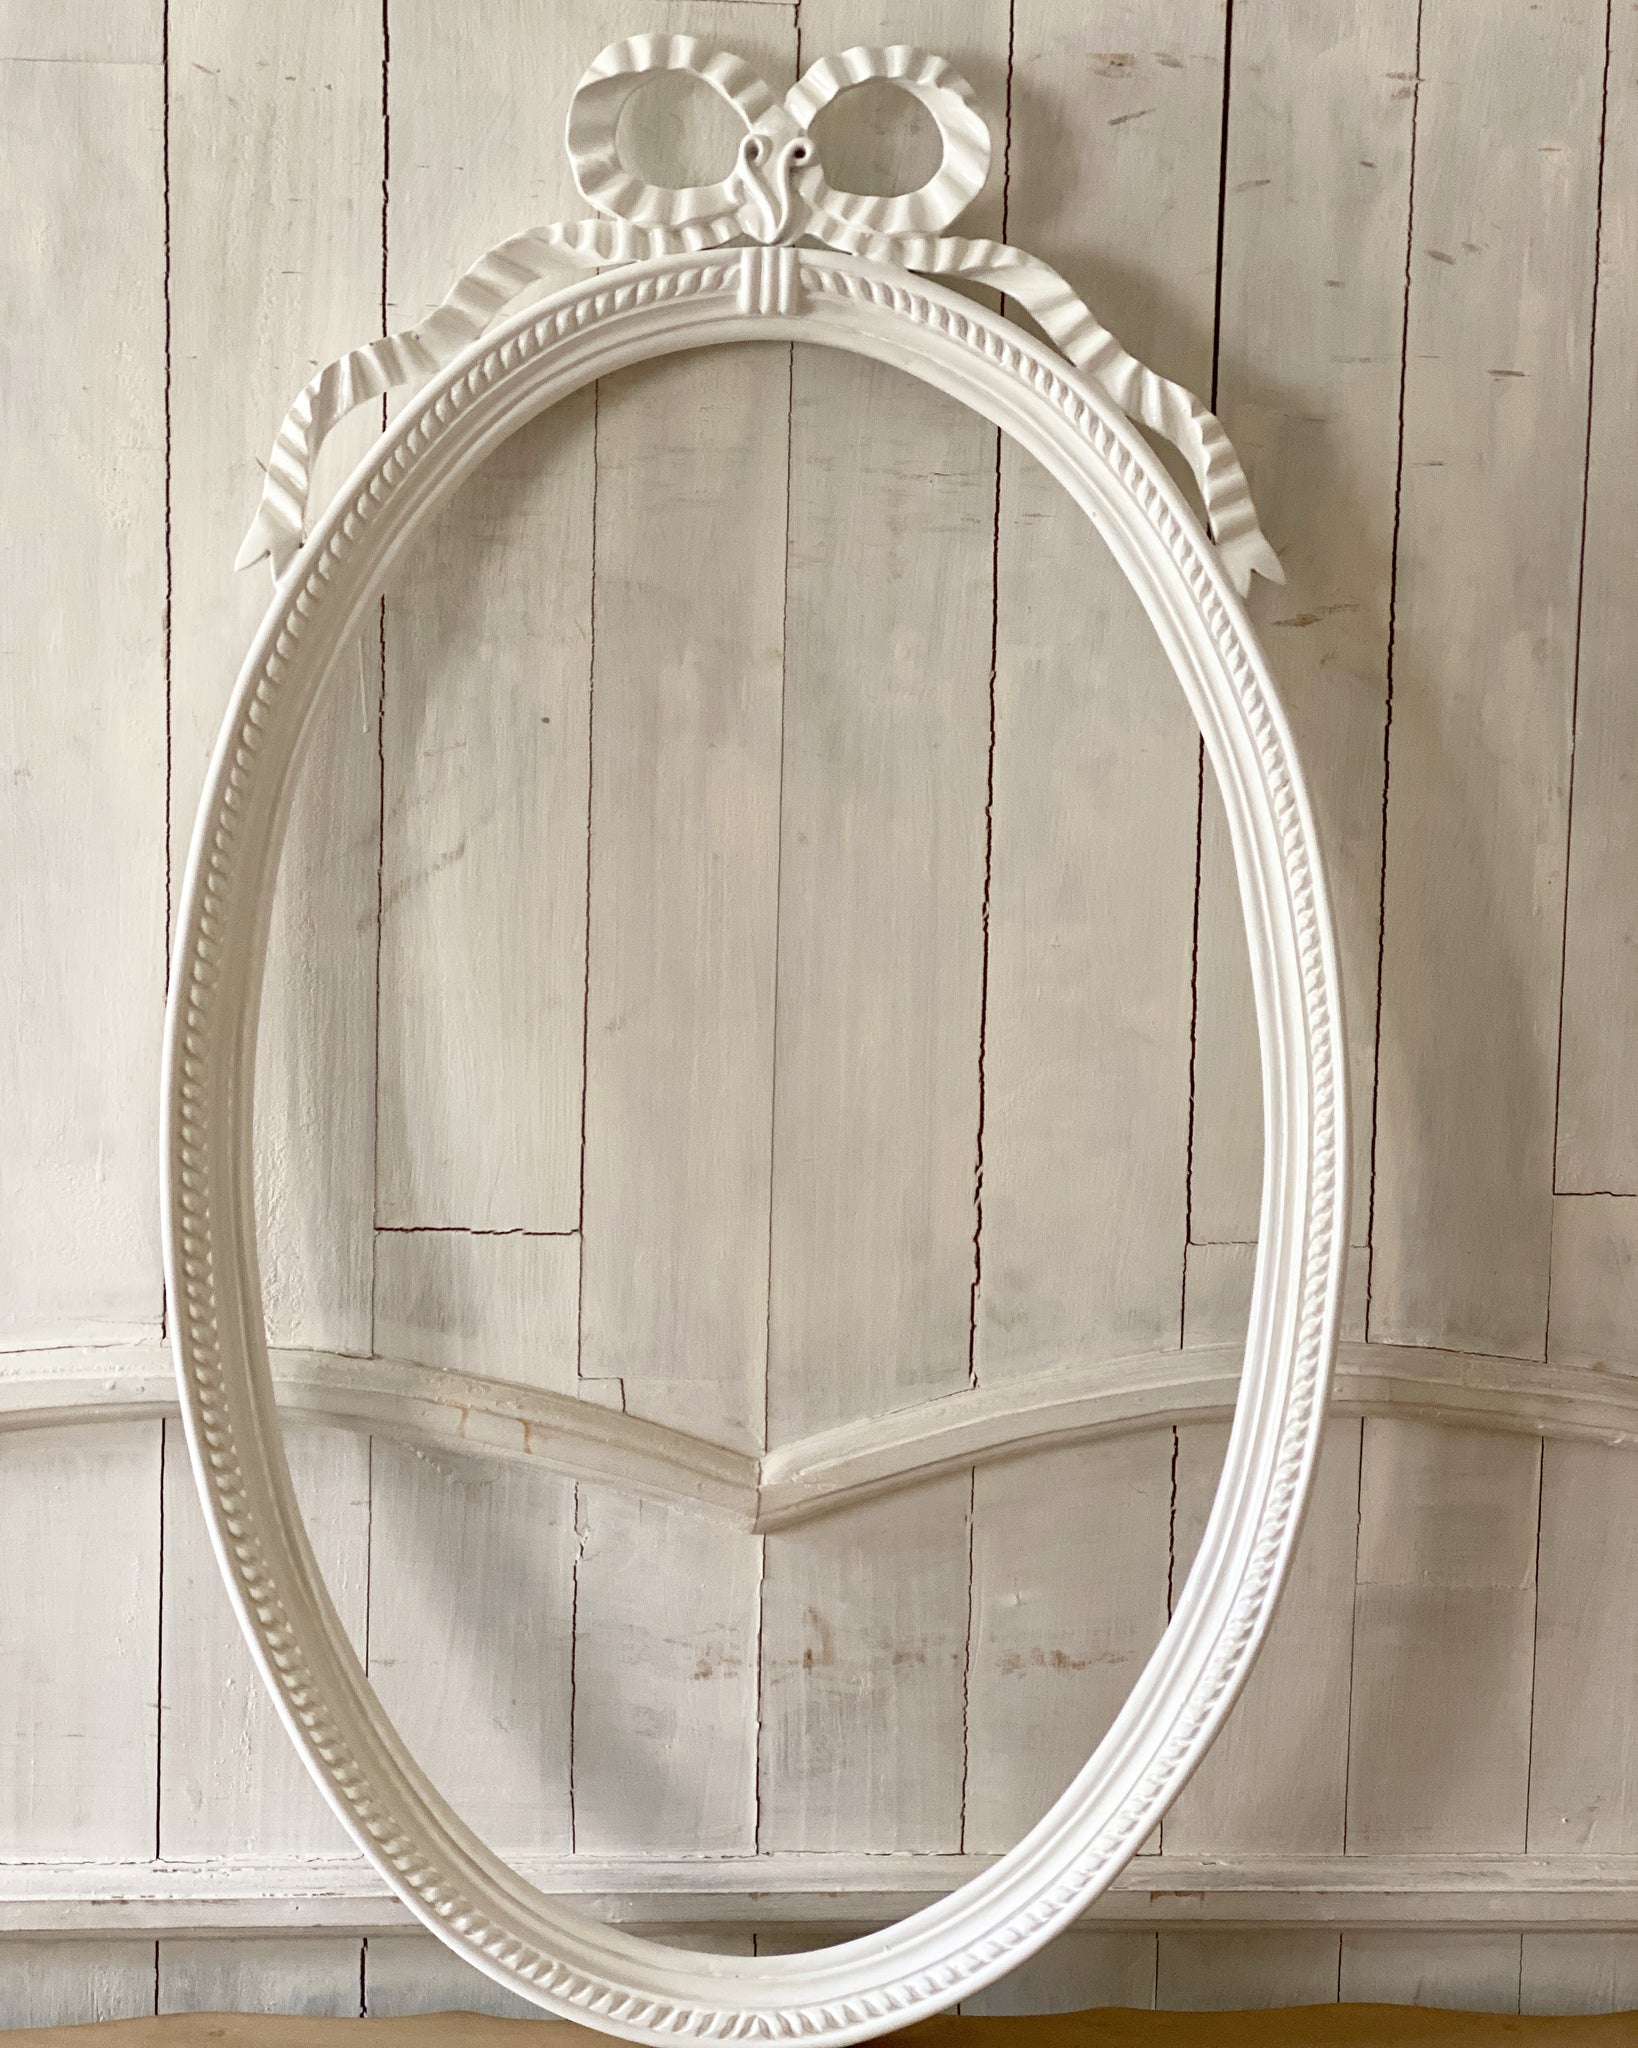 Rare oval silhouette The Unfurling riband frame